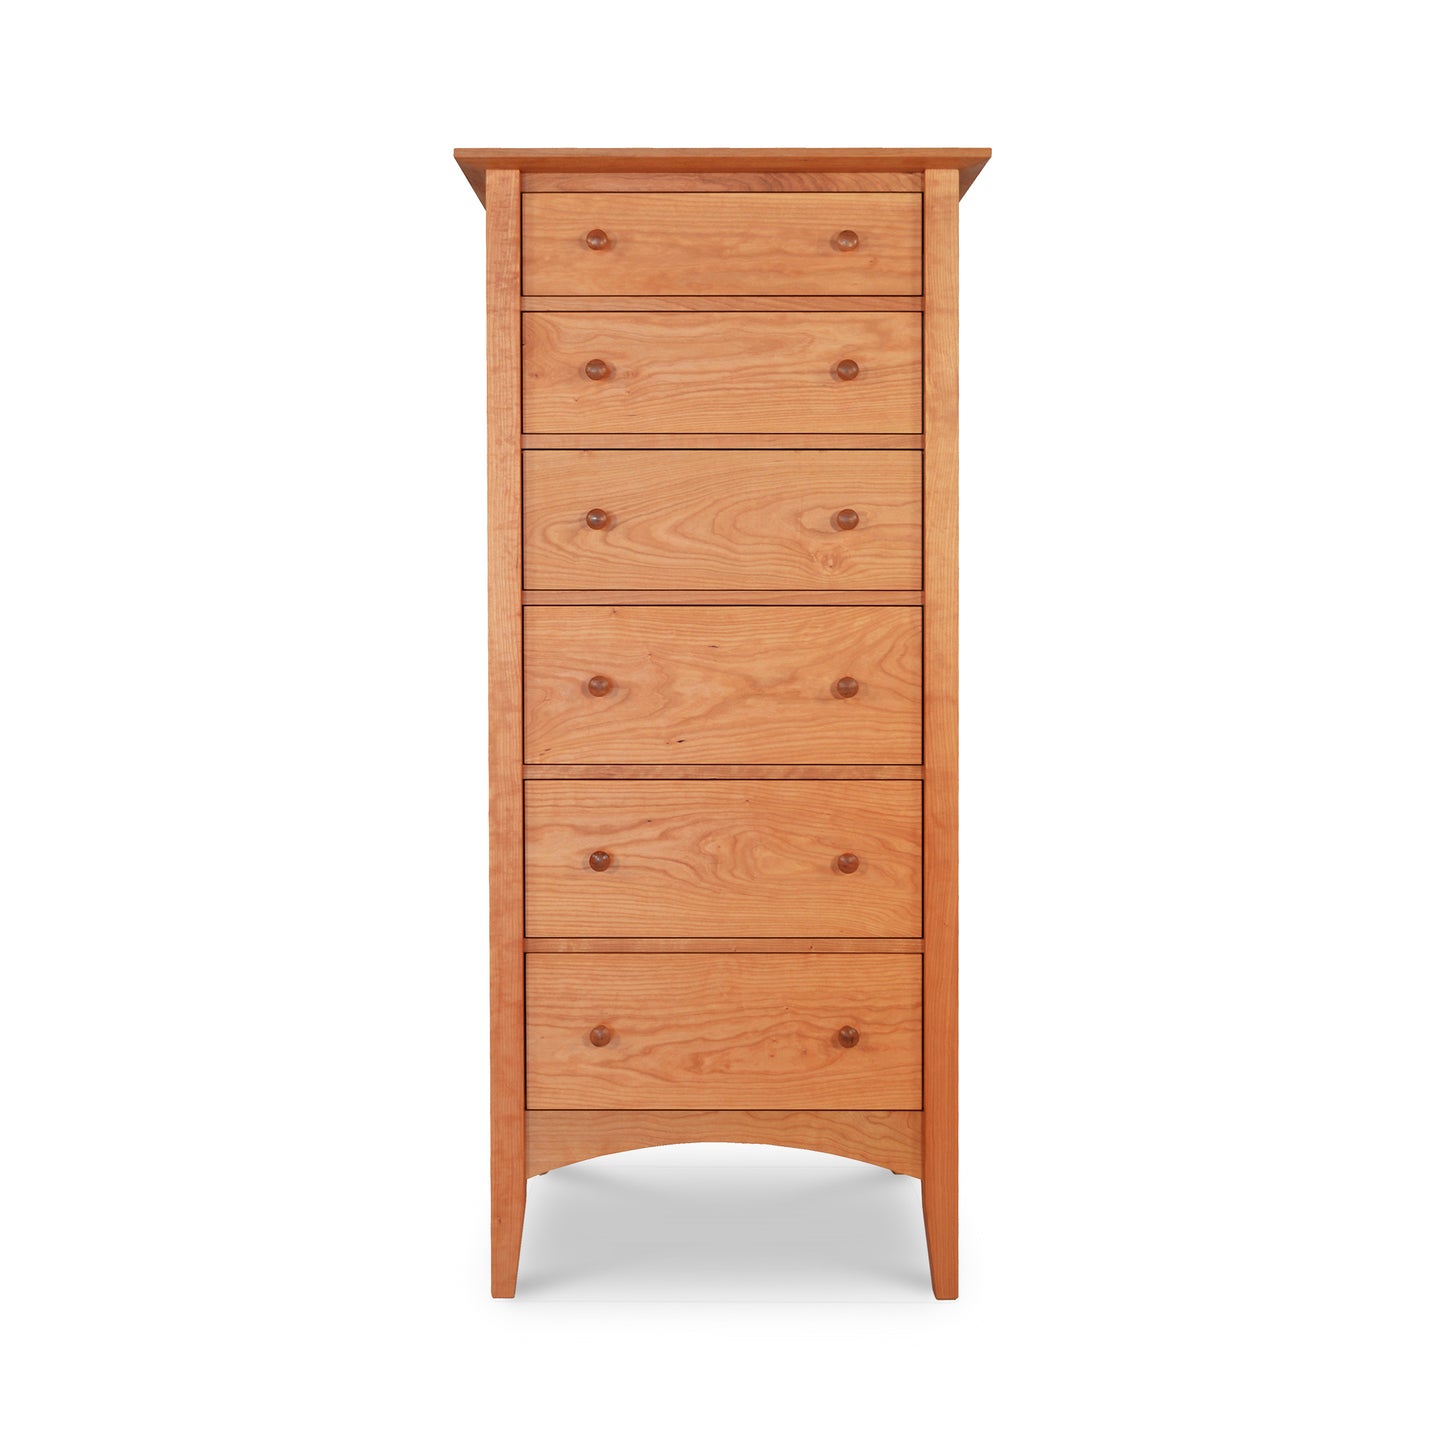 A tall, slender American Shaker Lingerie Chest from Maple Corner Woodworks with five drawers, each featuring a round knob, standing against a plain white background. The lingerie chest has a slightly overhanging top.